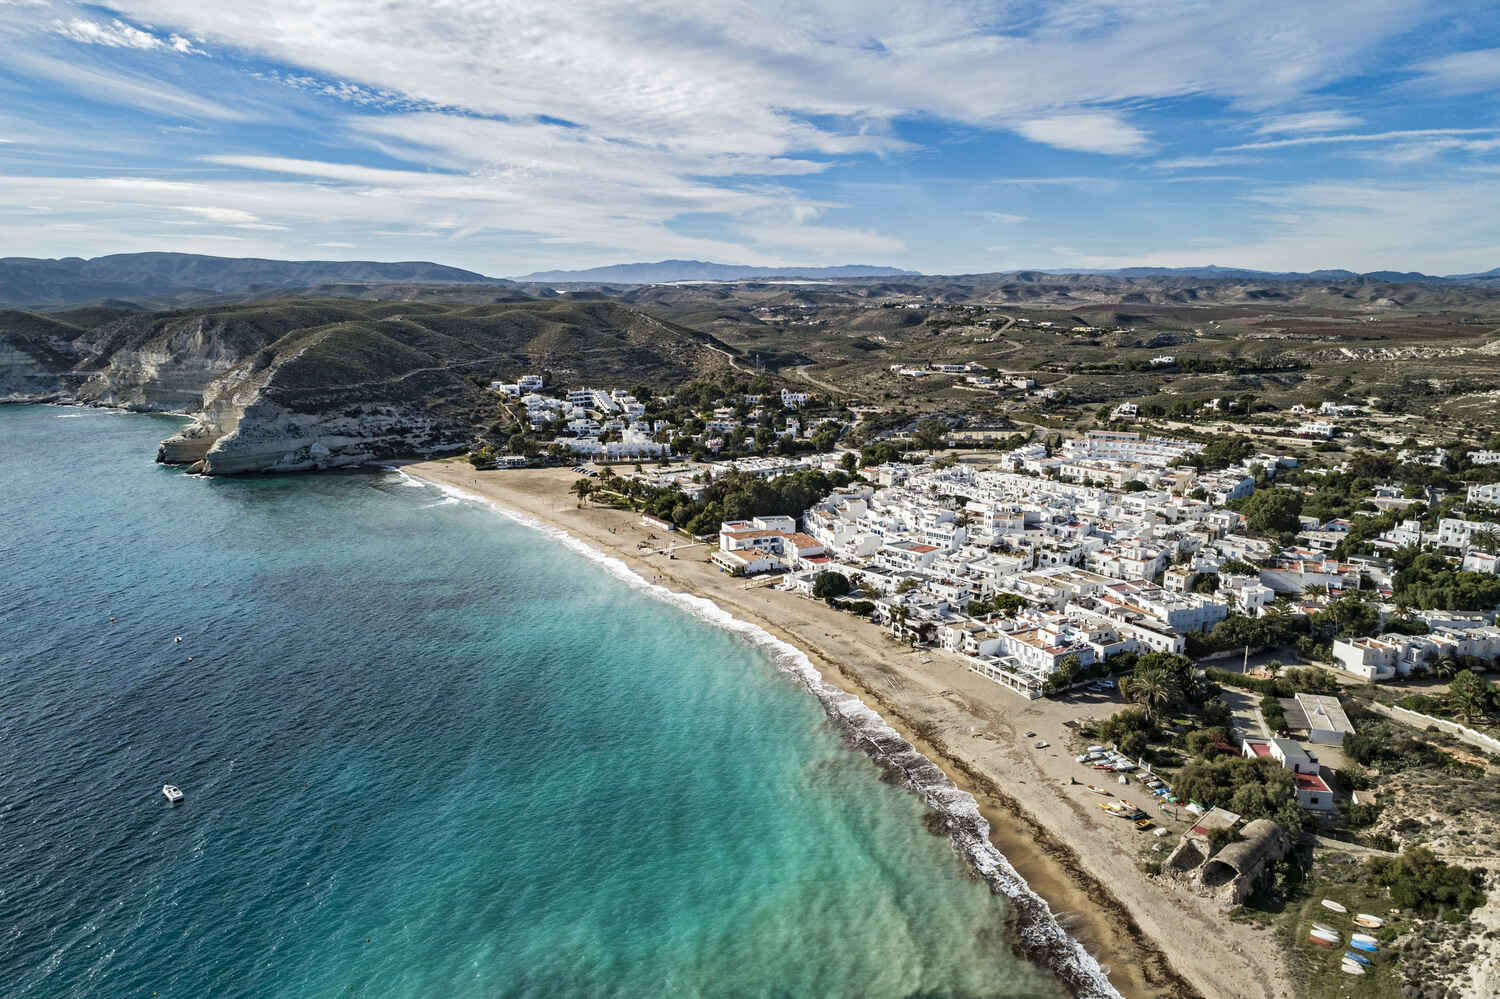 Aerial view of the city of Almeria with blue waters and white-washed town near a mountainous background